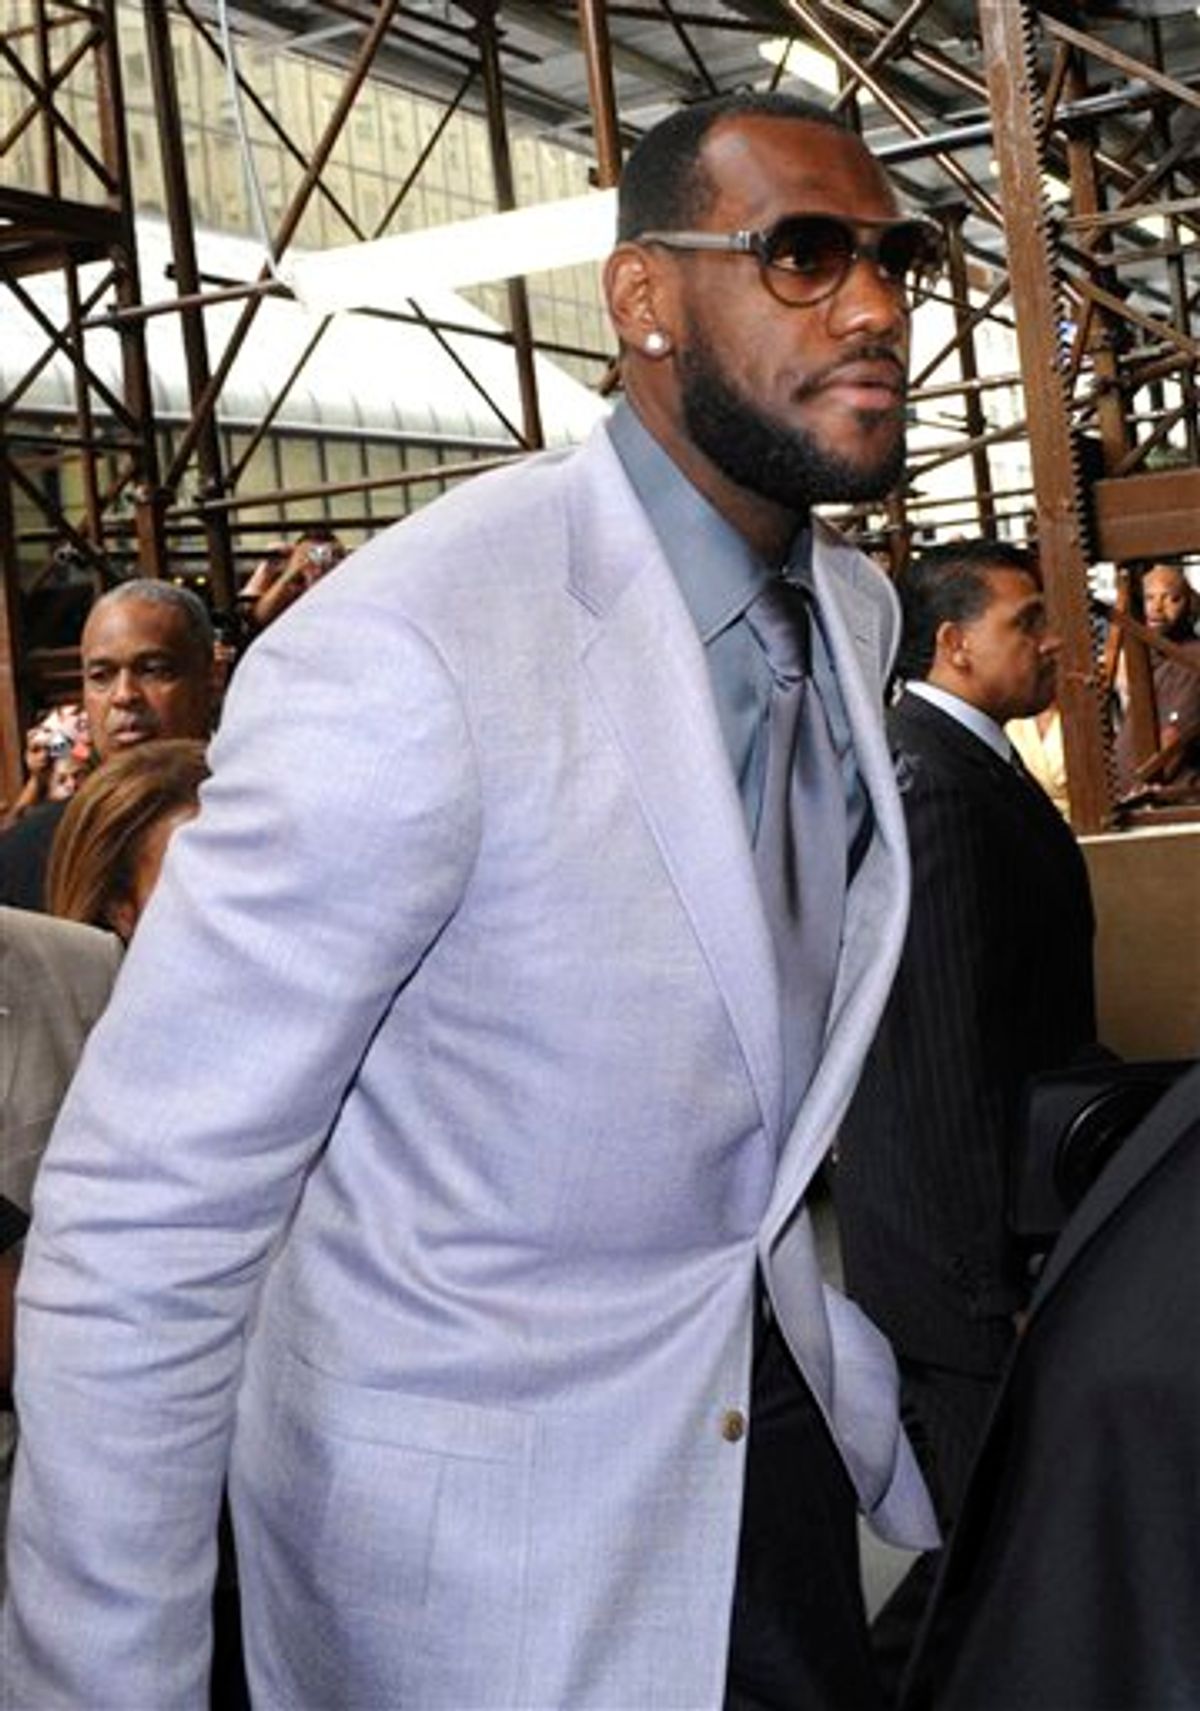 LeBron James enters Cipriani's to attend the wedding of Denver Nuggets star Carmelo Anthony and  LaLa Vasquez, Saturday, July 10, 2010, in New York. (AP Photo/ Louis Lanzano) (AP)